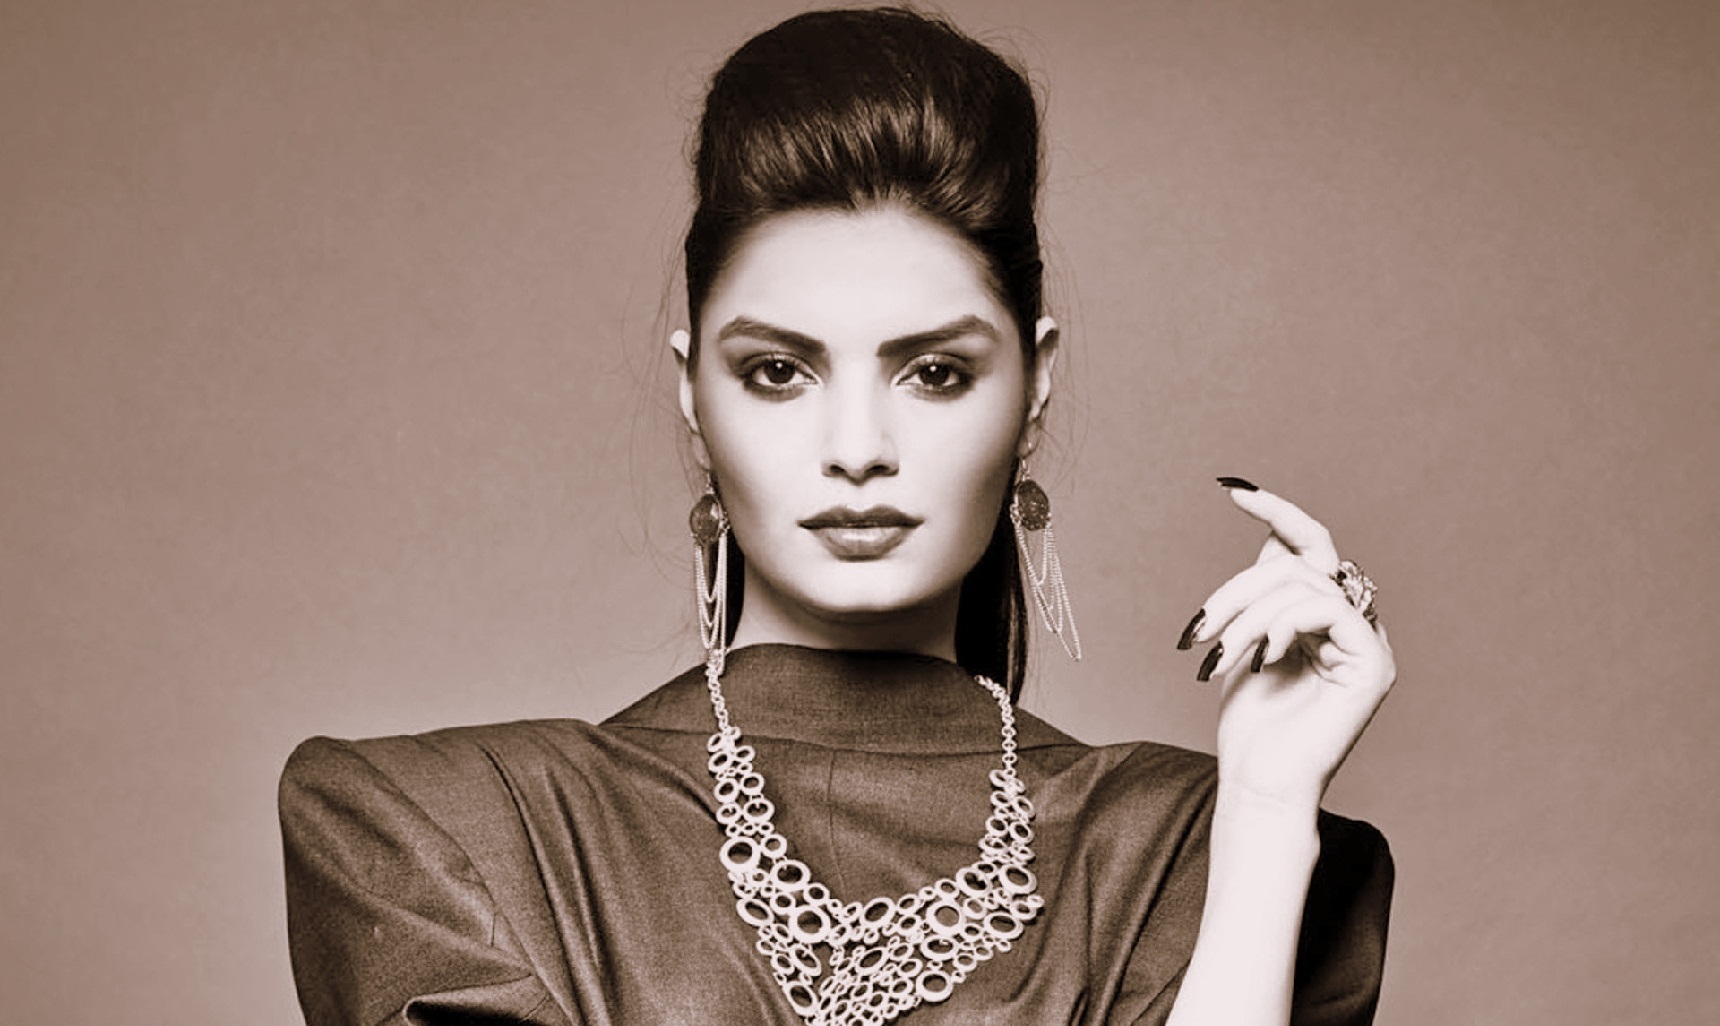 Sonali Raut Wallpapers and Photos